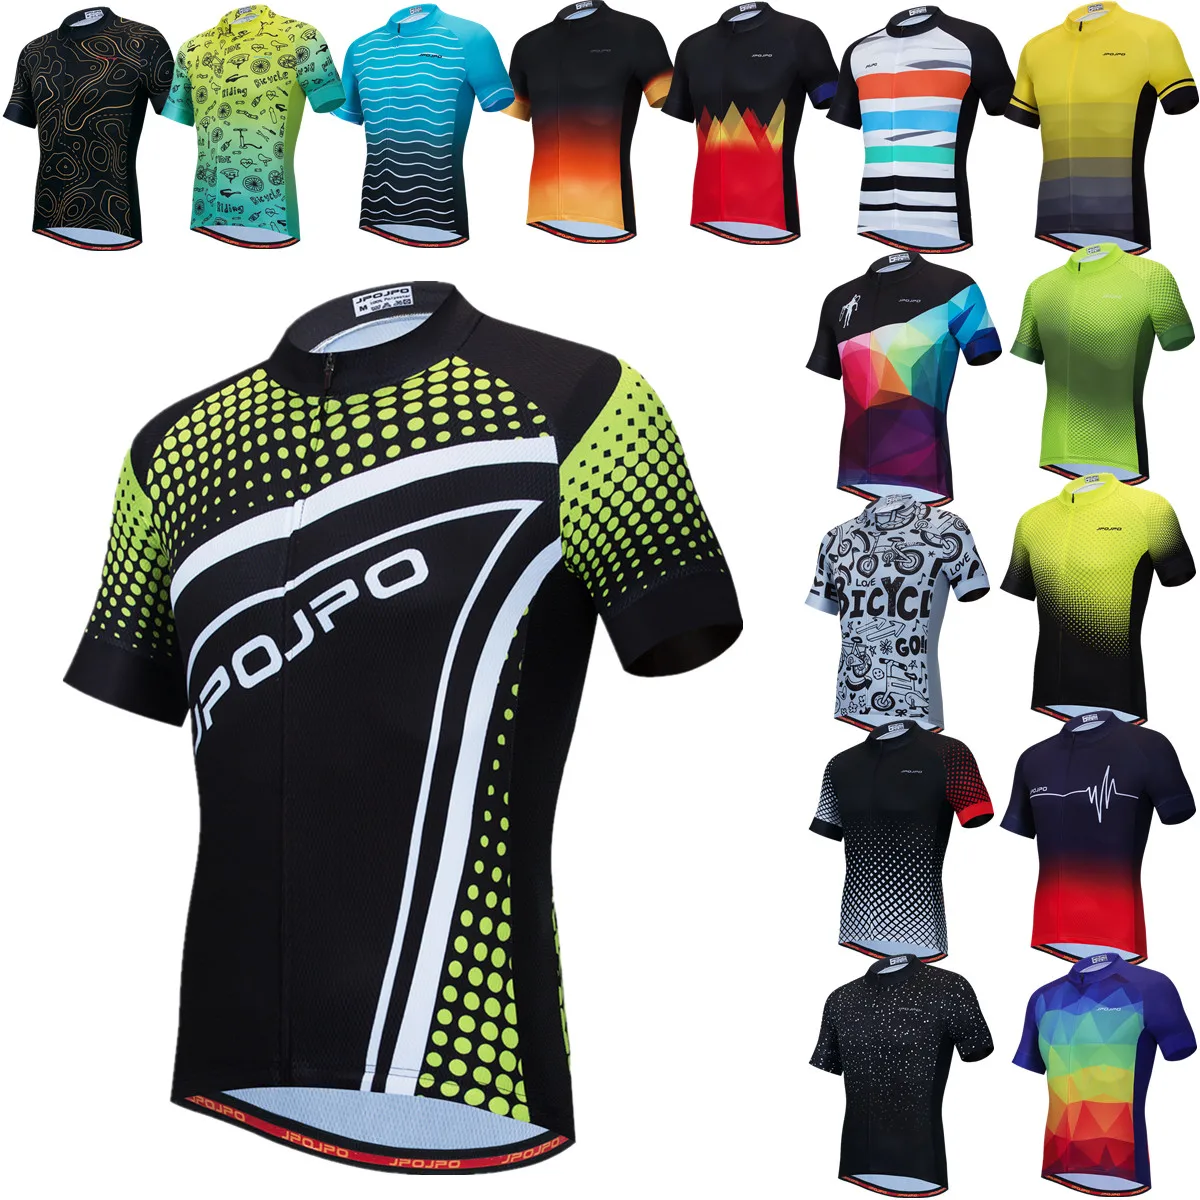 

Cycling Jersey Men MTB Jersey 2021 Bicycle Team Cycling Shirts Males' Short Sleeve Bike Wear Summer Premium Bicycle Clothing